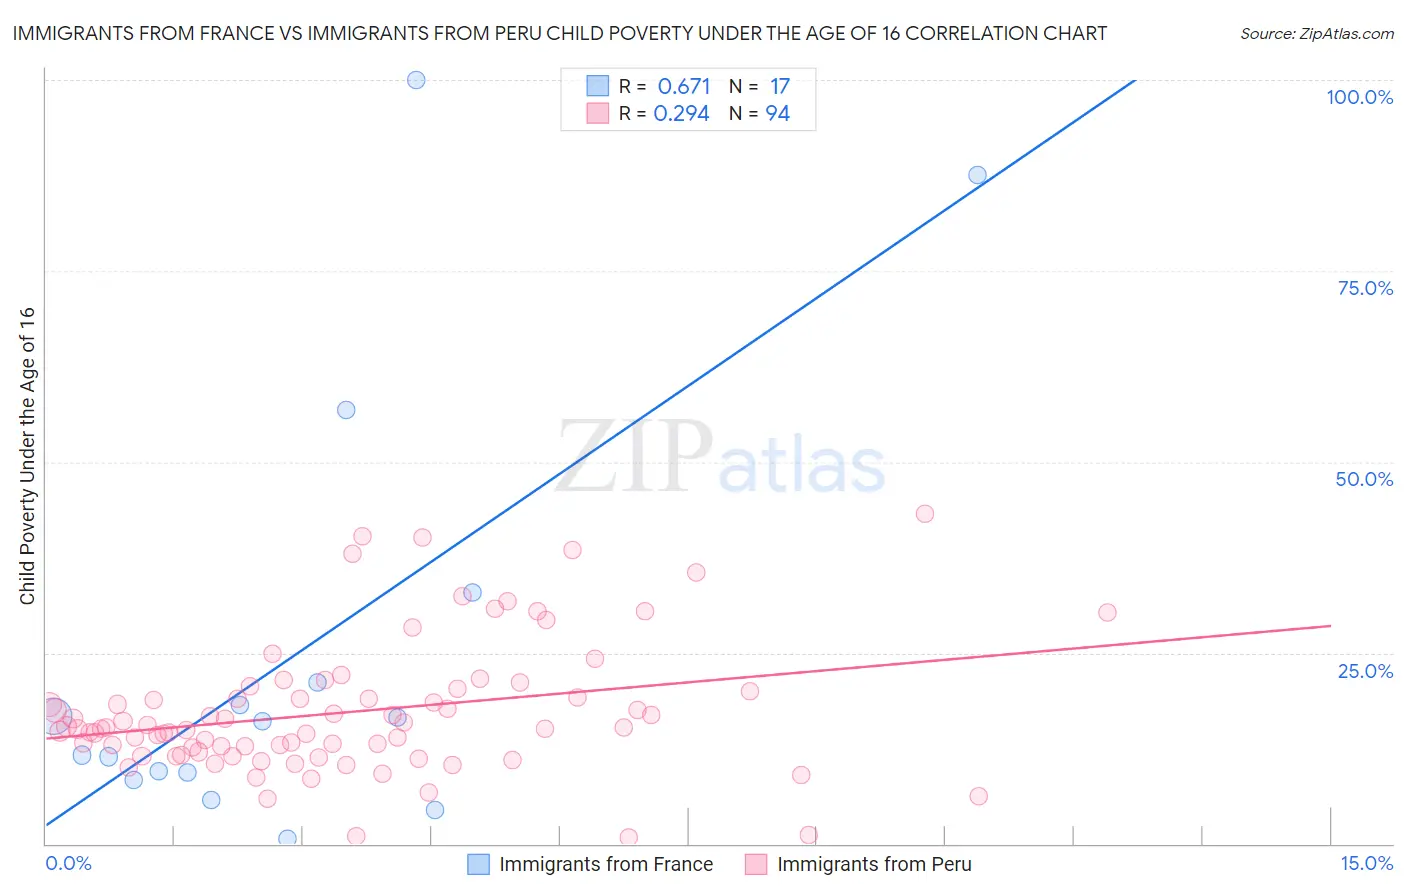 Immigrants from France vs Immigrants from Peru Child Poverty Under the Age of 16